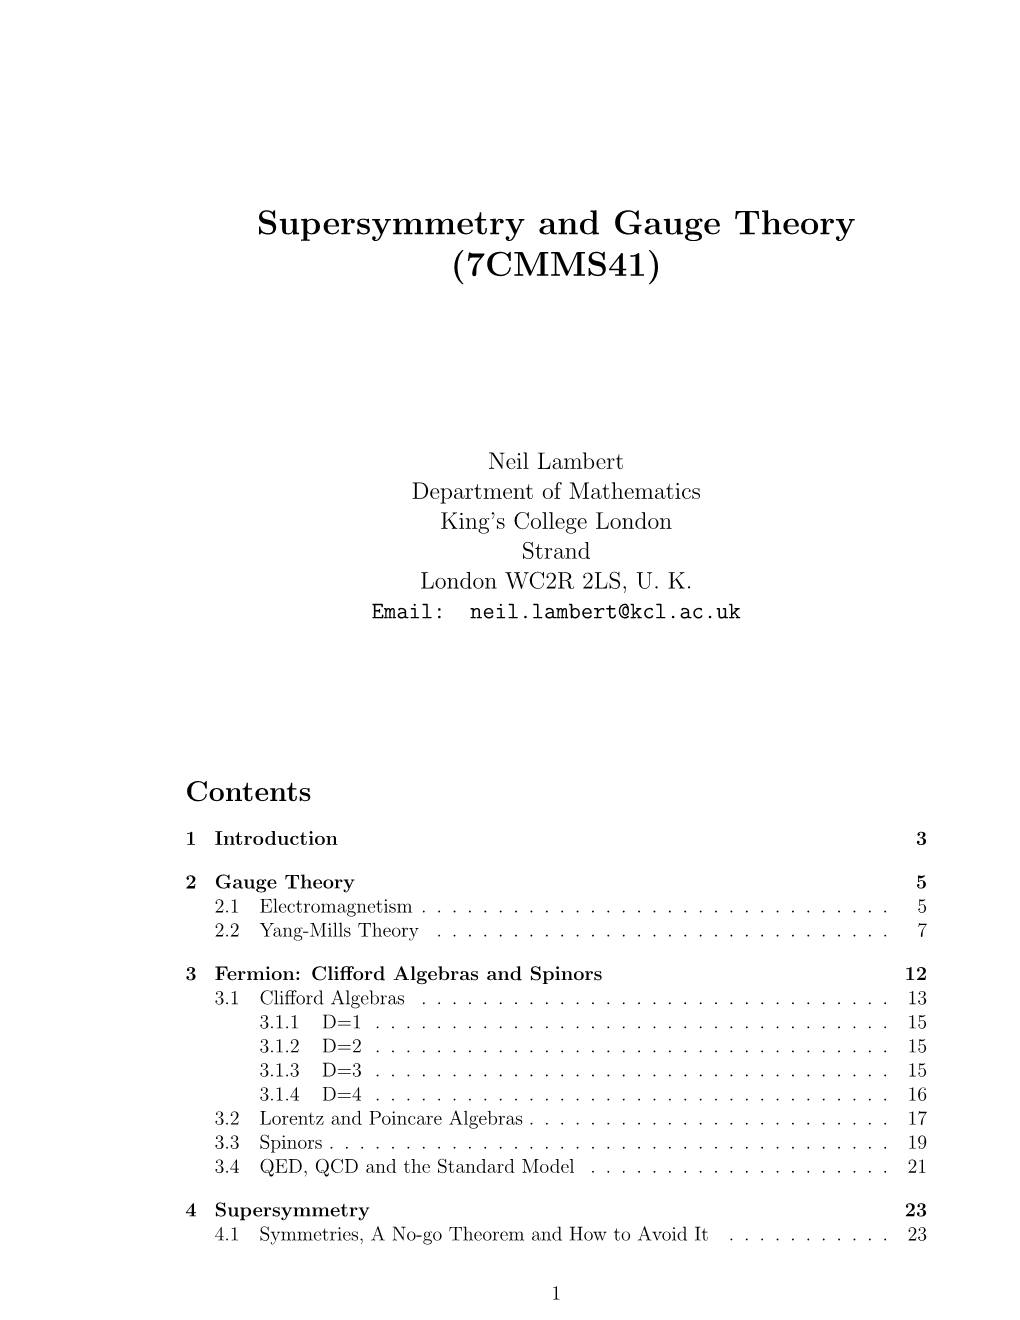 Supersymmetry and Gauge Theory (7CMMS41)